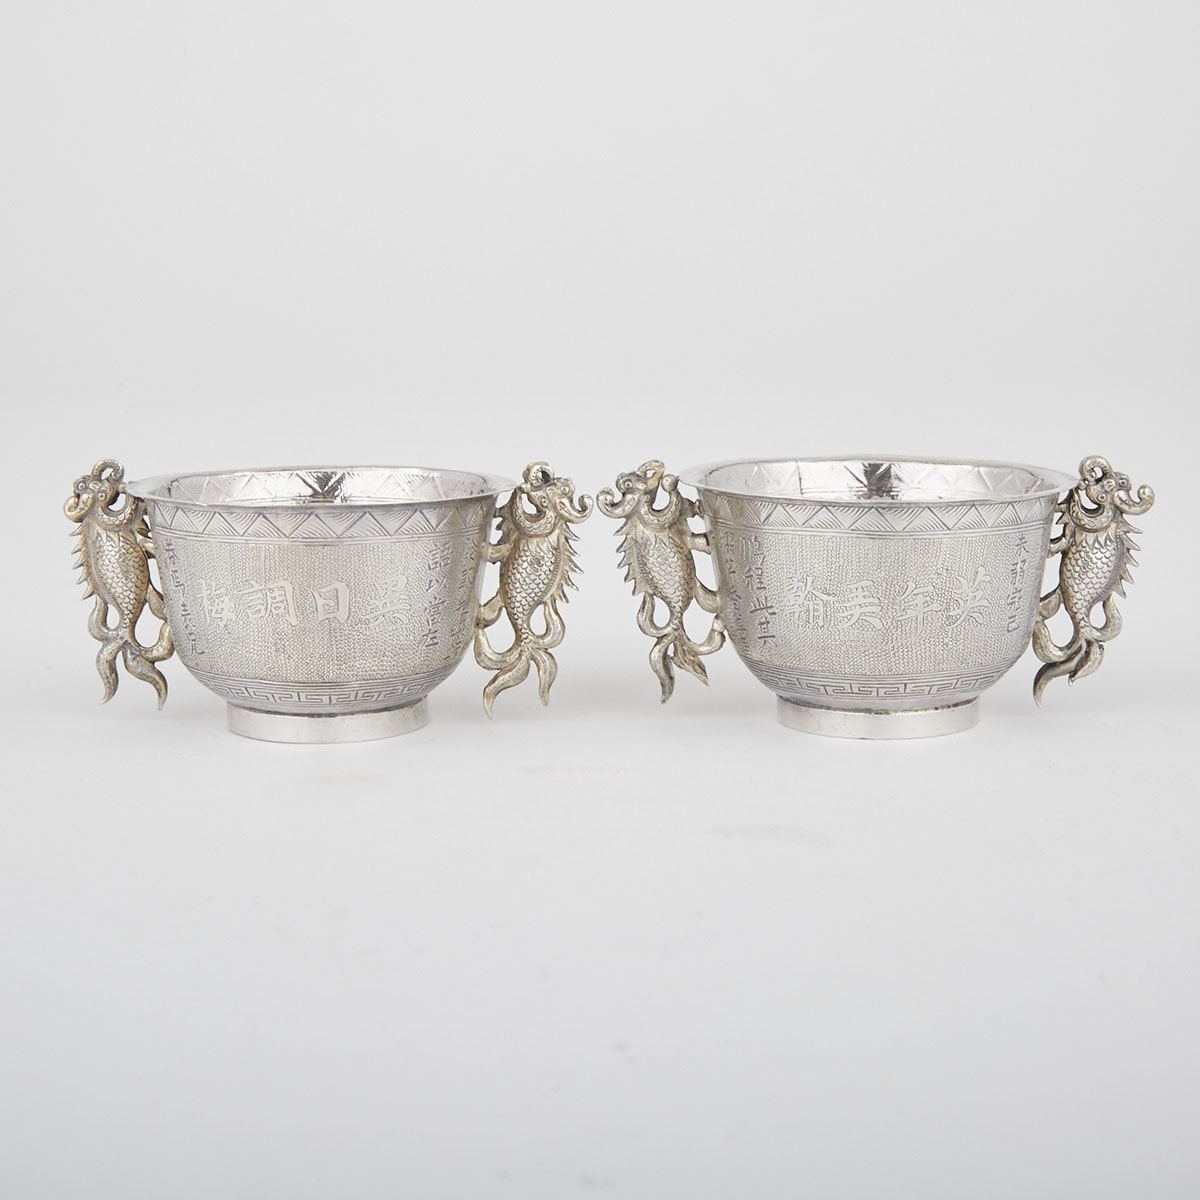 Pair of Silver Fish Dragon Ceremonial Cups, Macau, Early 20th Century